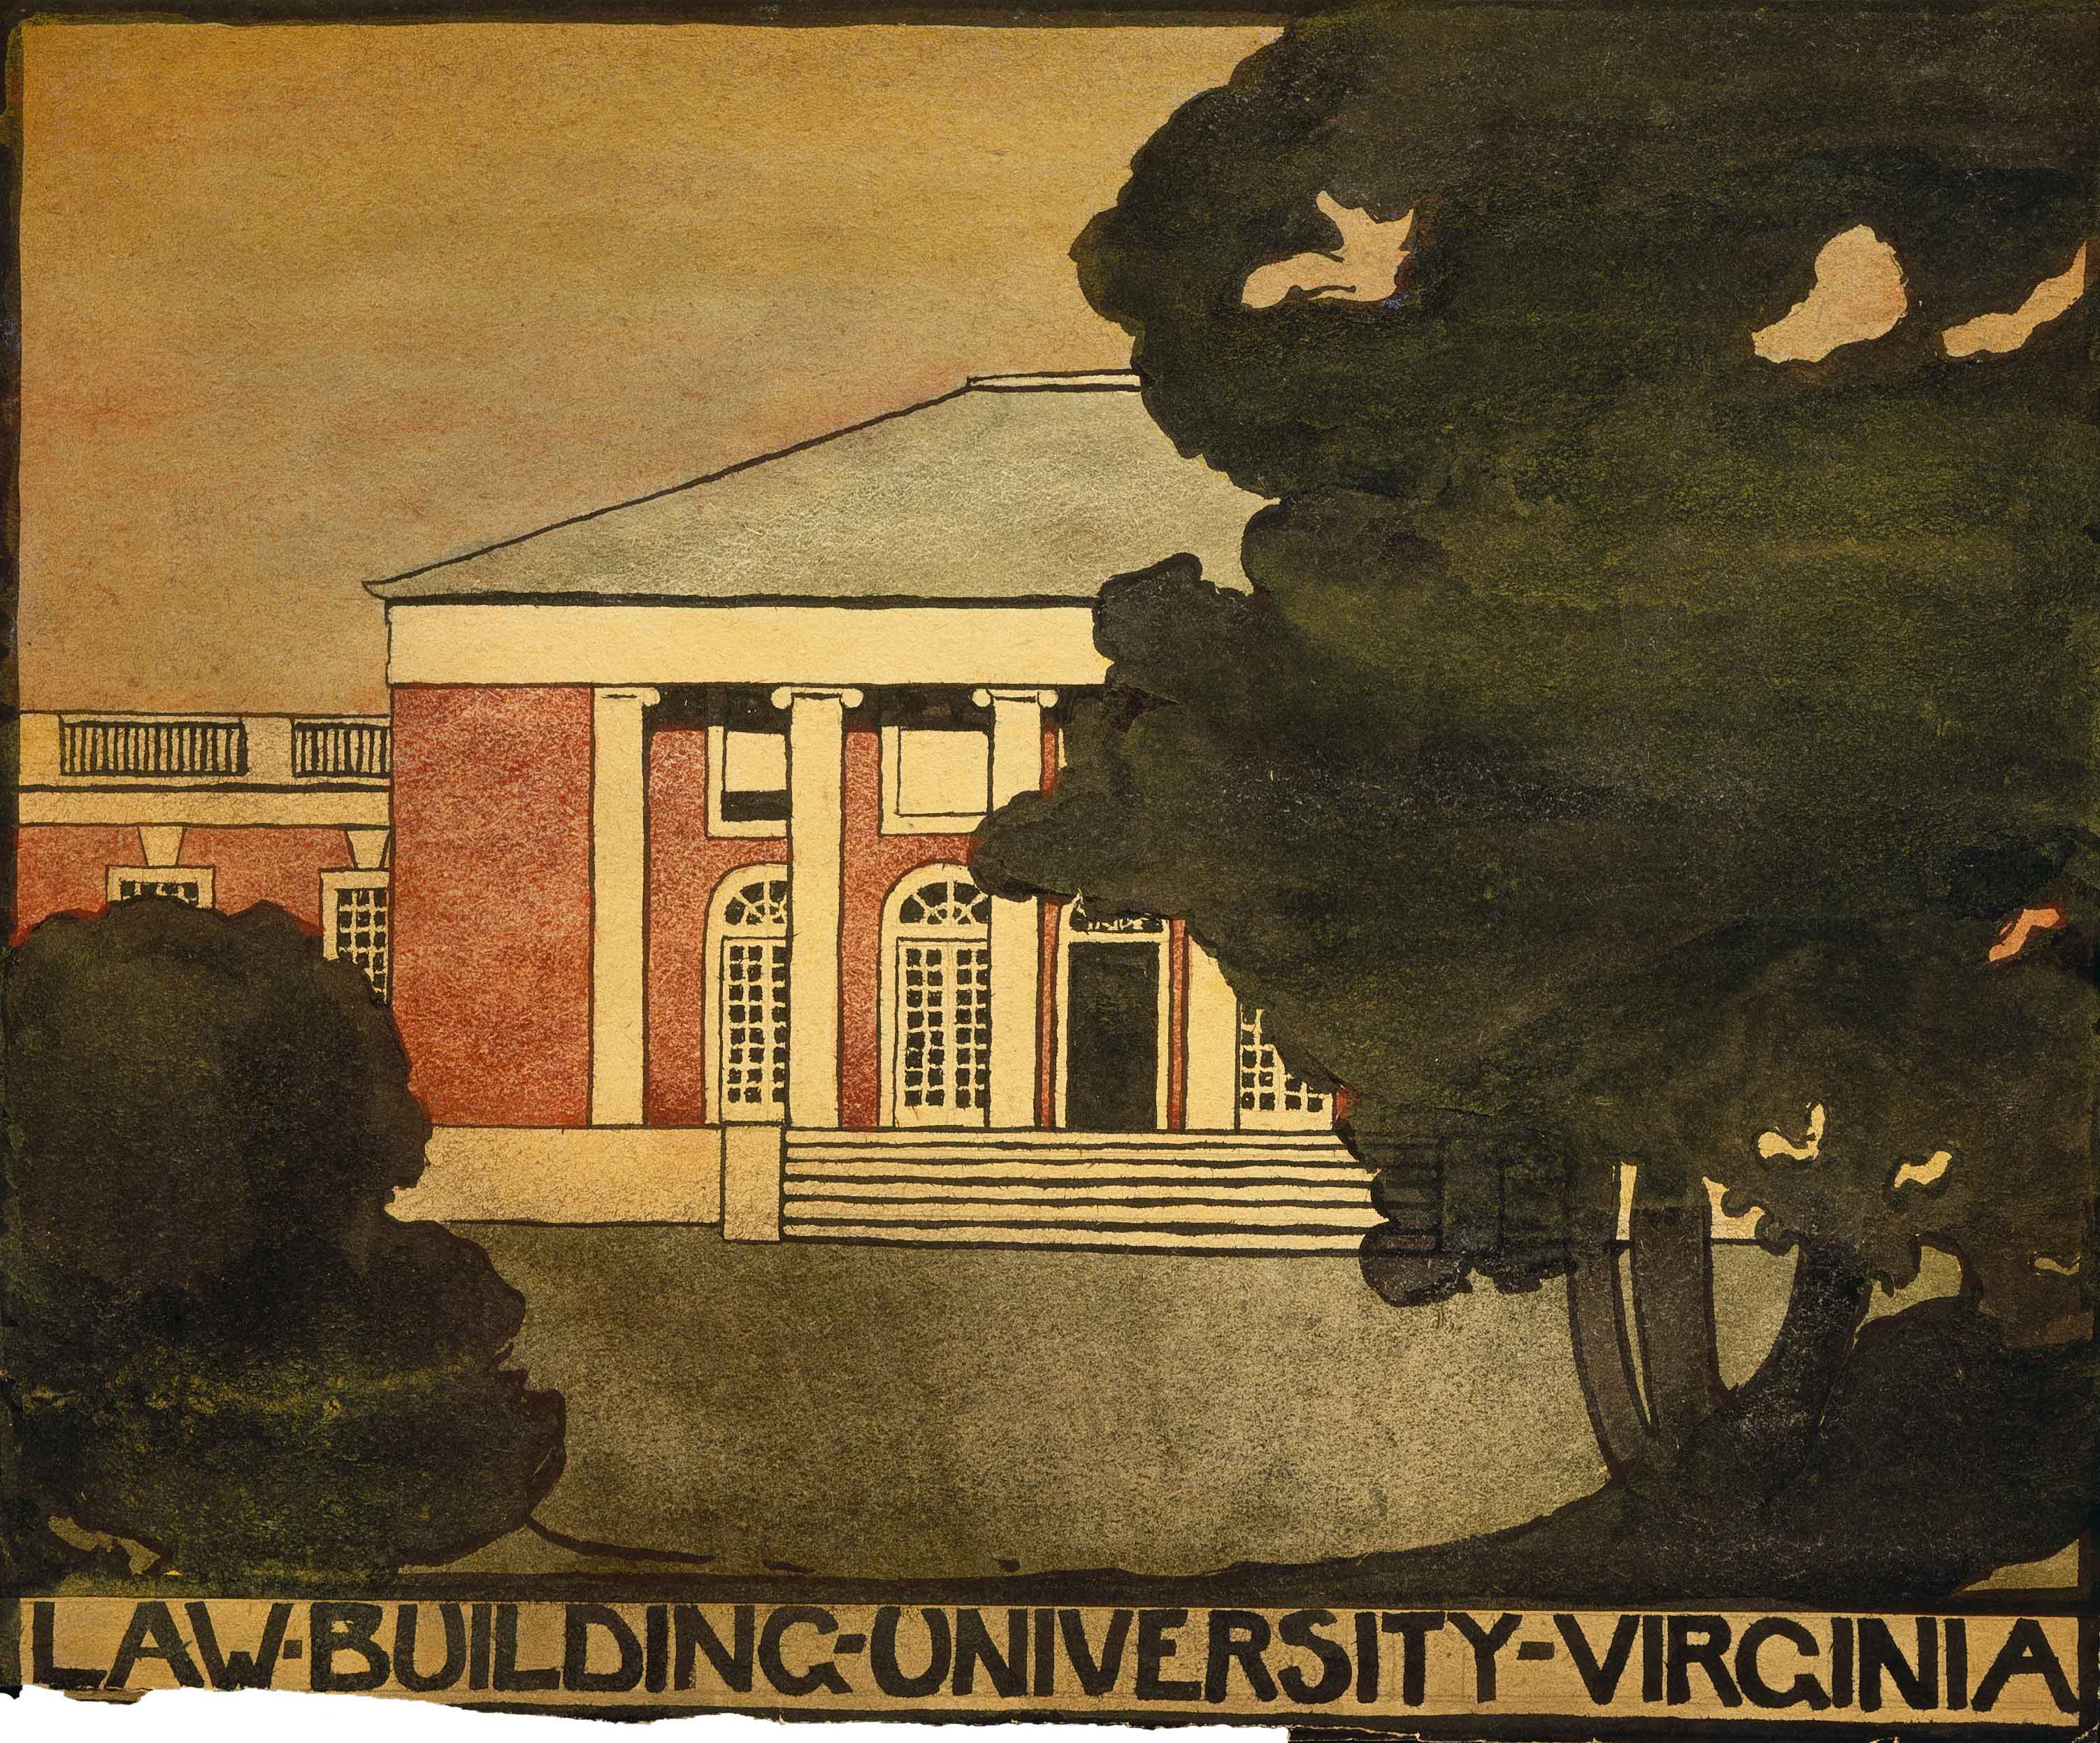 Untitled (Law Building - University of Virginia), 1912-1914, Georgia O’Keeffe, Watercolor on paper 9 x 11 7/8 (22.86 x 30.16), Georgia O’Keeffe Museum, Gift of The Georgia O’Keeffe Foundation (2006.05.614), © Georgia O’Keeffe Museum 